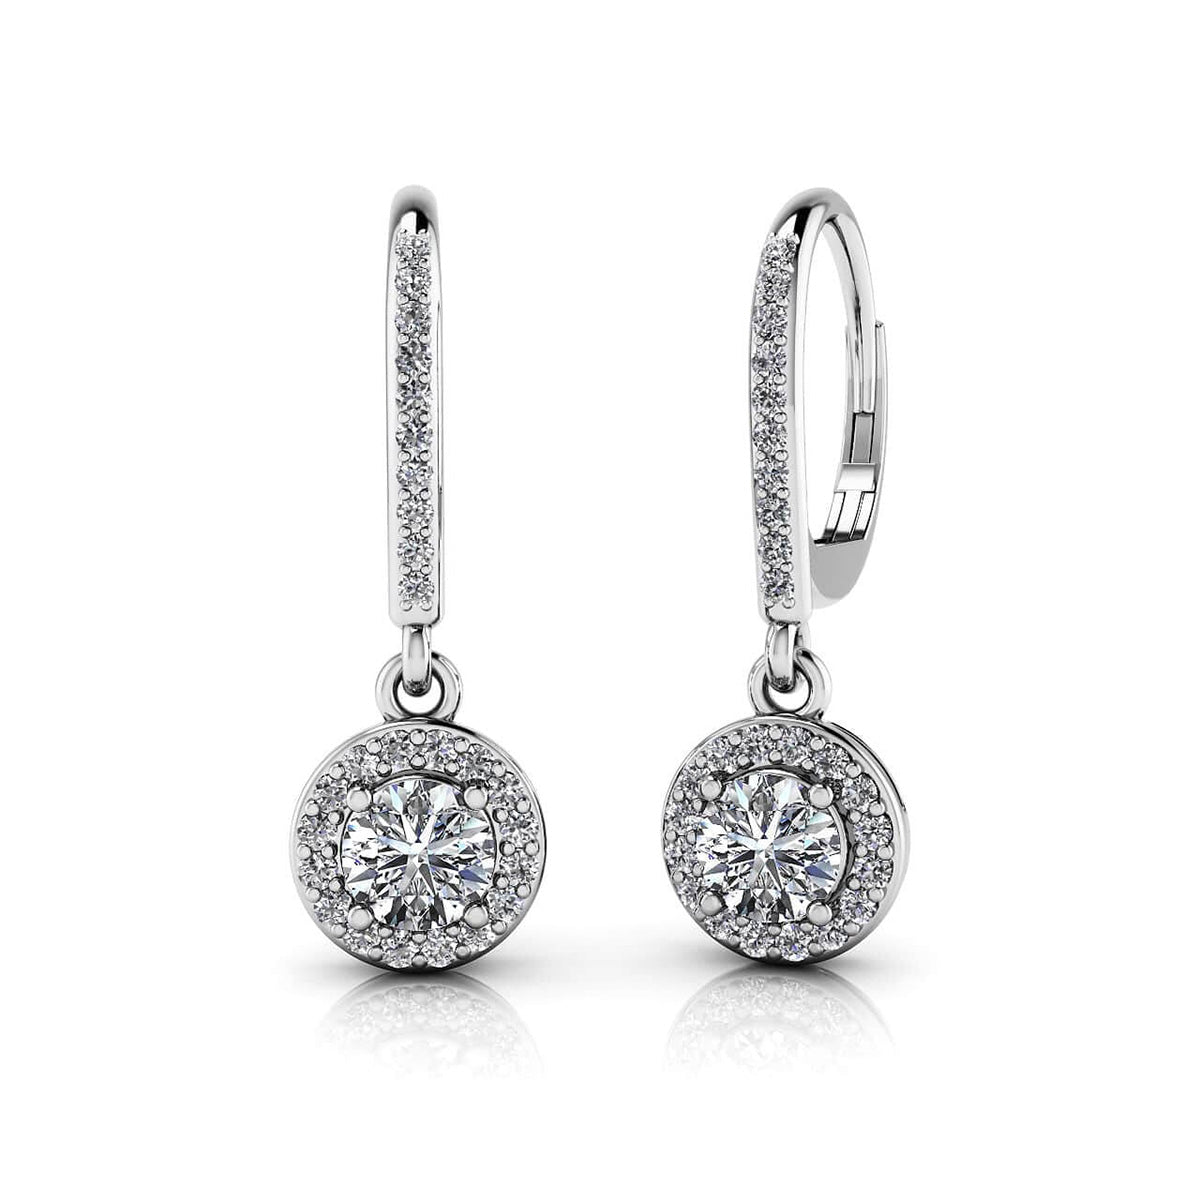 Surrounded With Love Diamond Drop Earrings